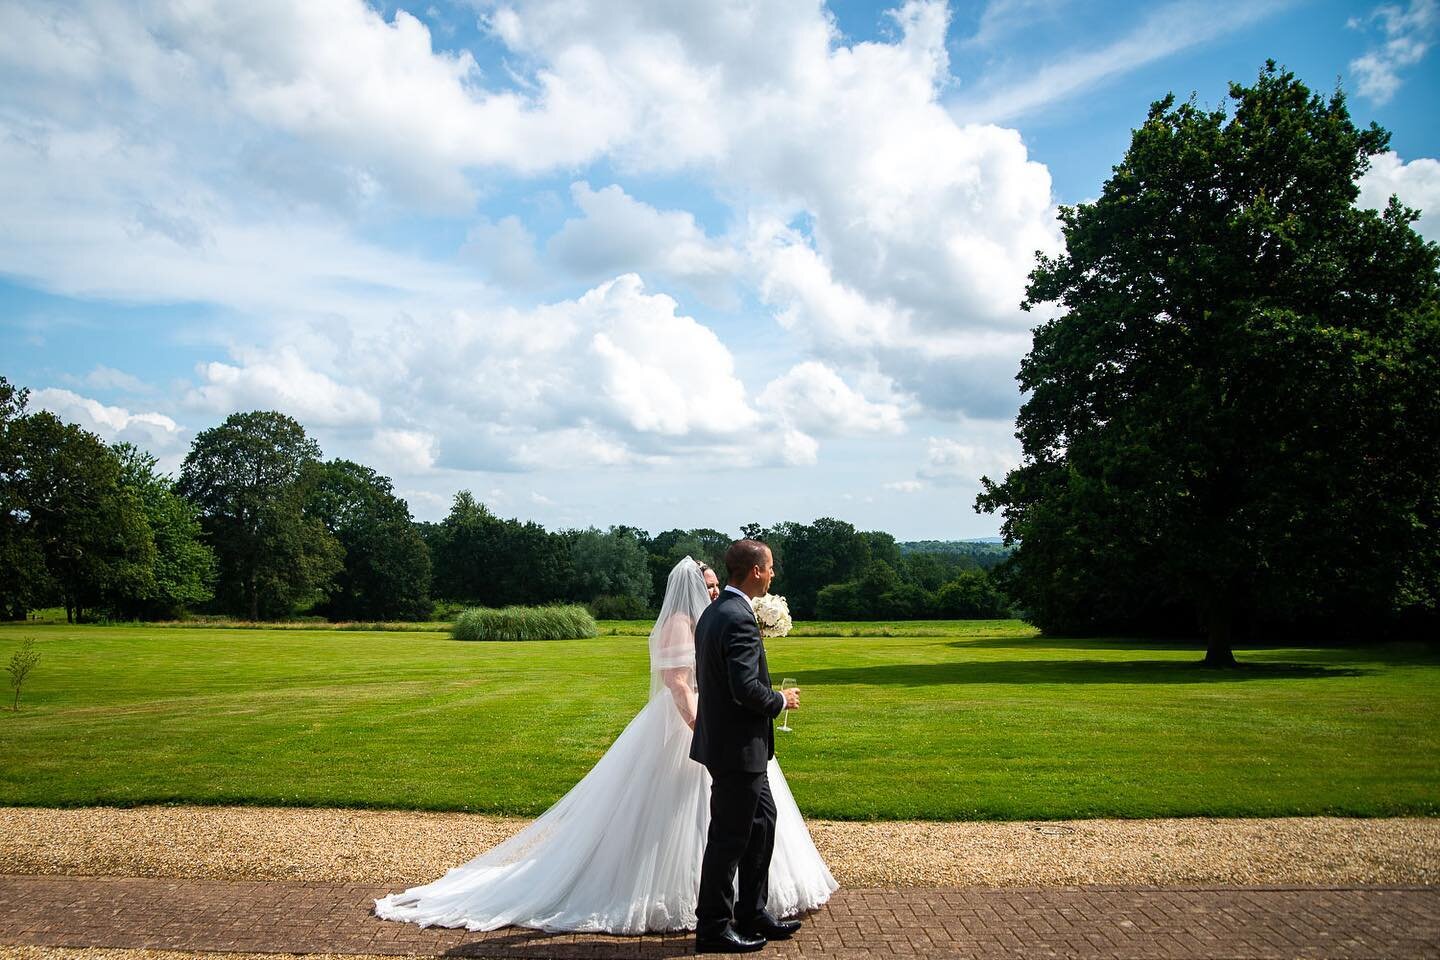 BLUE SKIES // This is England. It might rain in July and be sunny in November, no one knows&hellip; We suggest not worrying and simply looking forward to walking hand in hand with your person on your best day. 

Wedding: S&amp;G, July 2021
Photograph